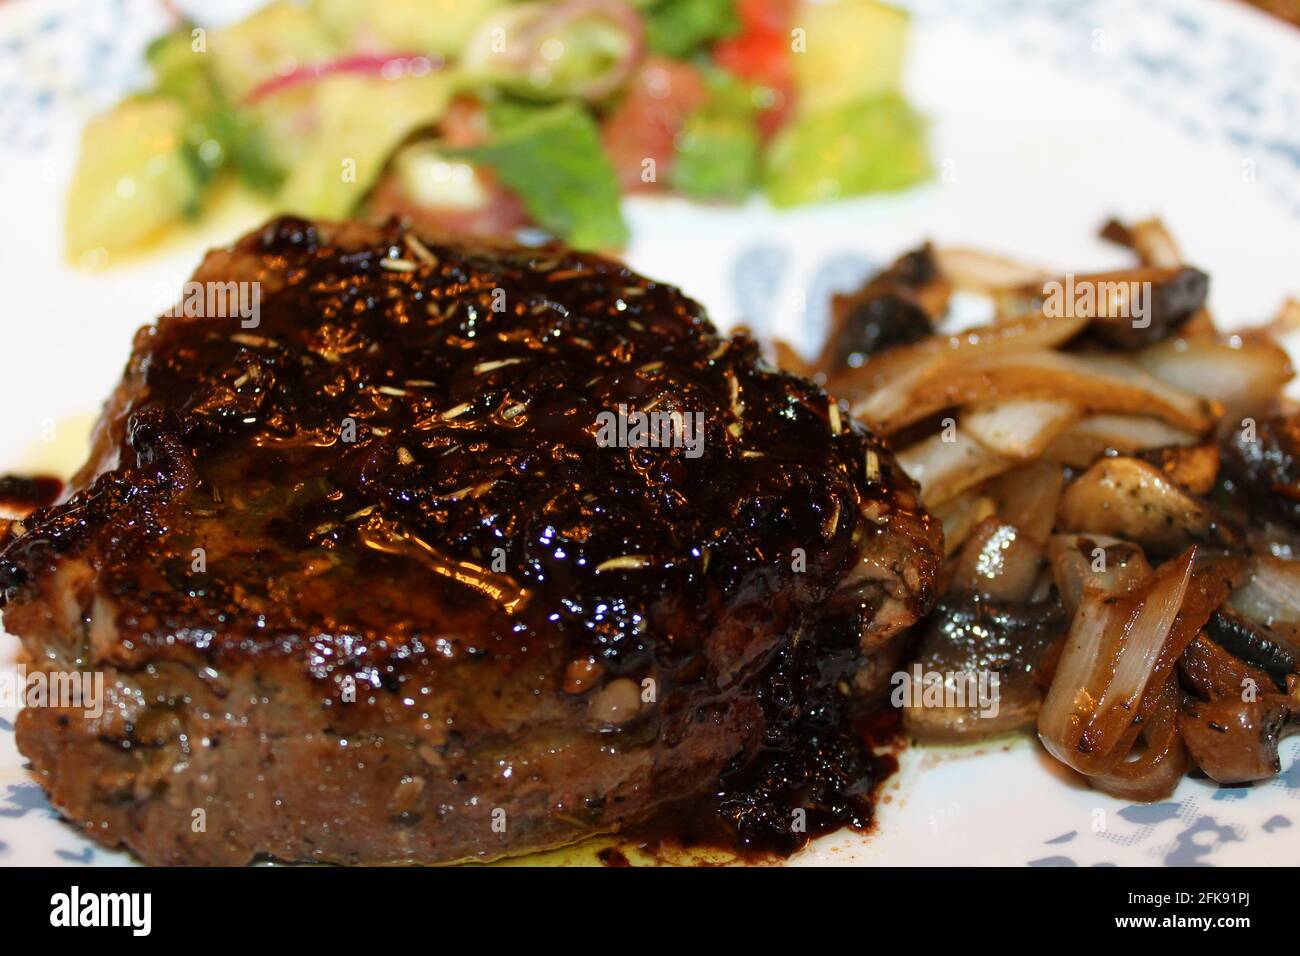 Close-up of a fried steak with a red wine reduction, mushrooms and onions, and a salad. Stock Photo